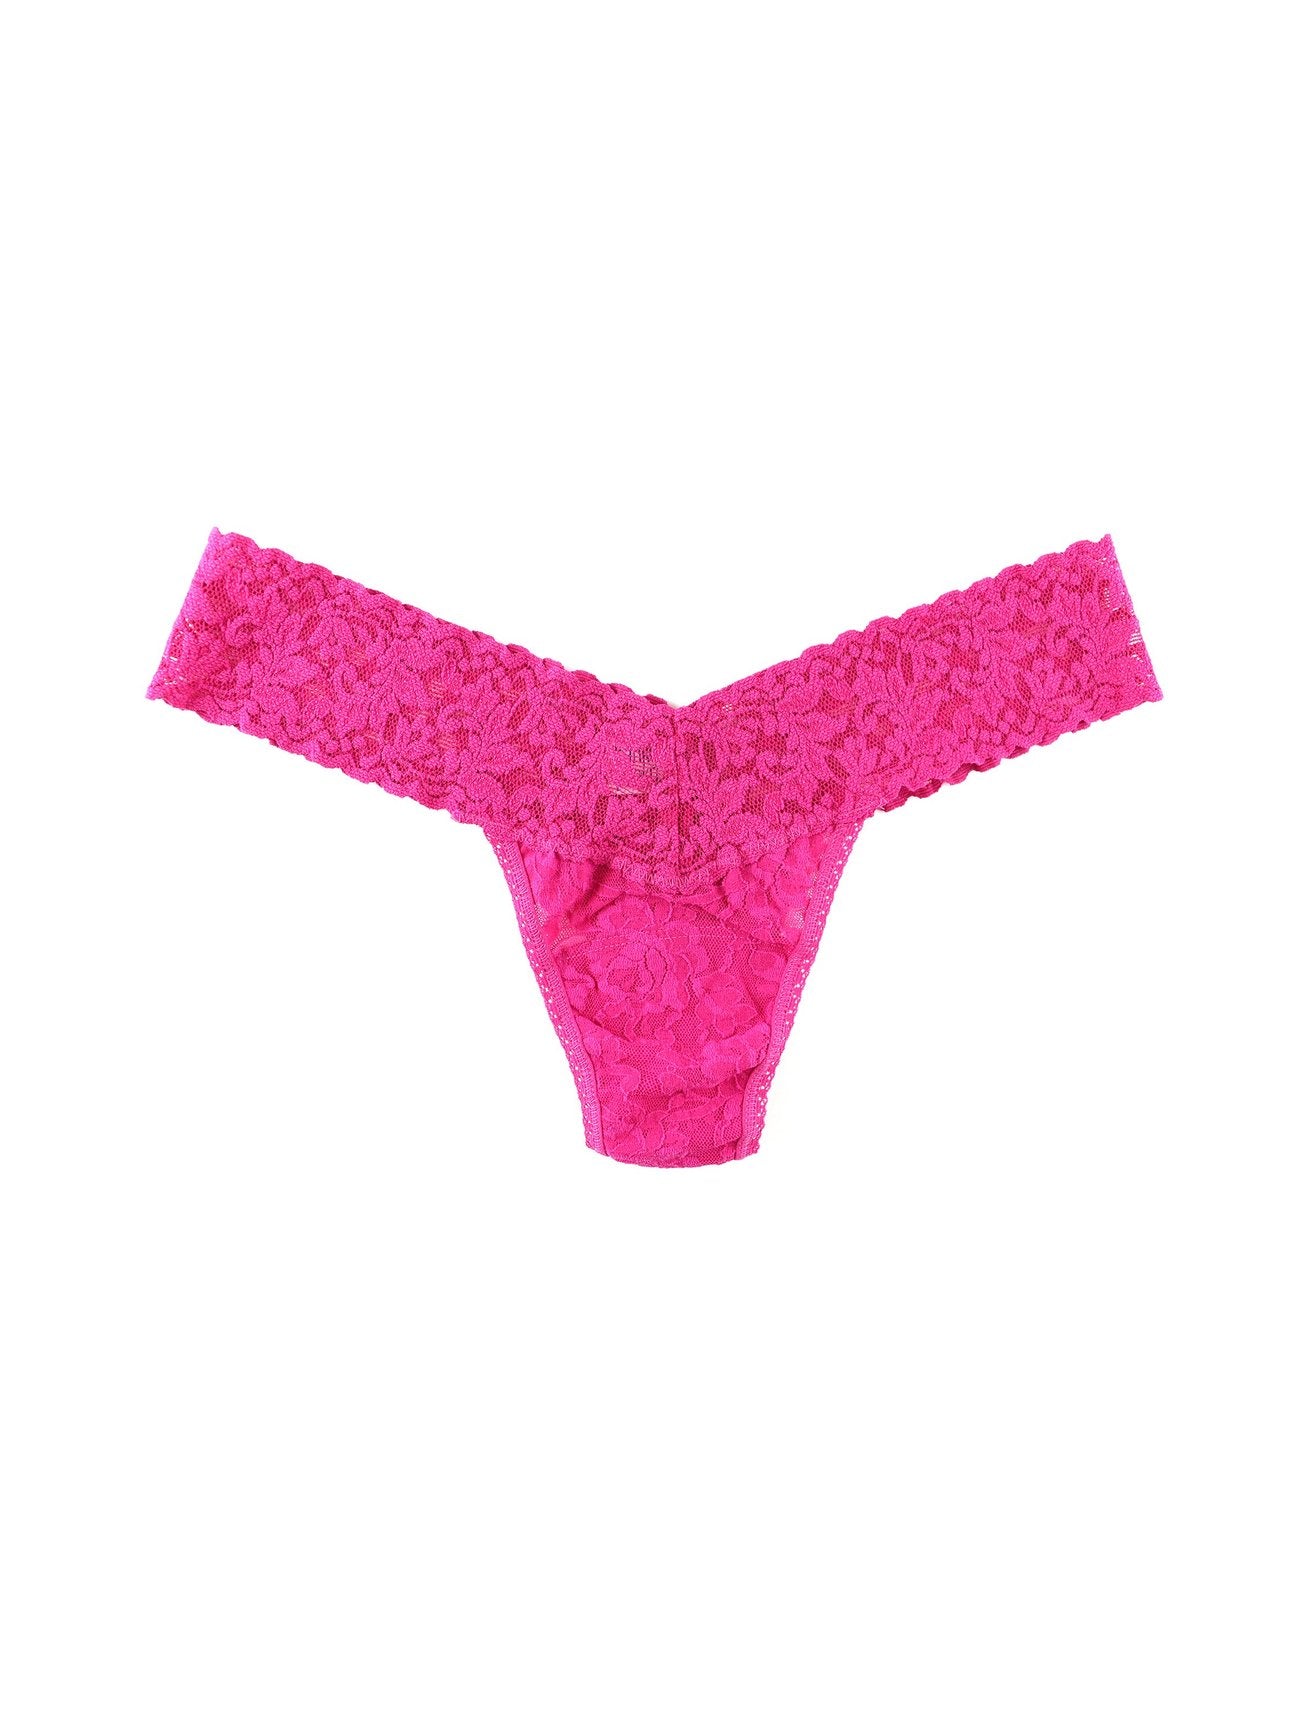 Buy venetian-pink Hanky Panky Signature Lace Low Rise Thong - Packaged 4911p